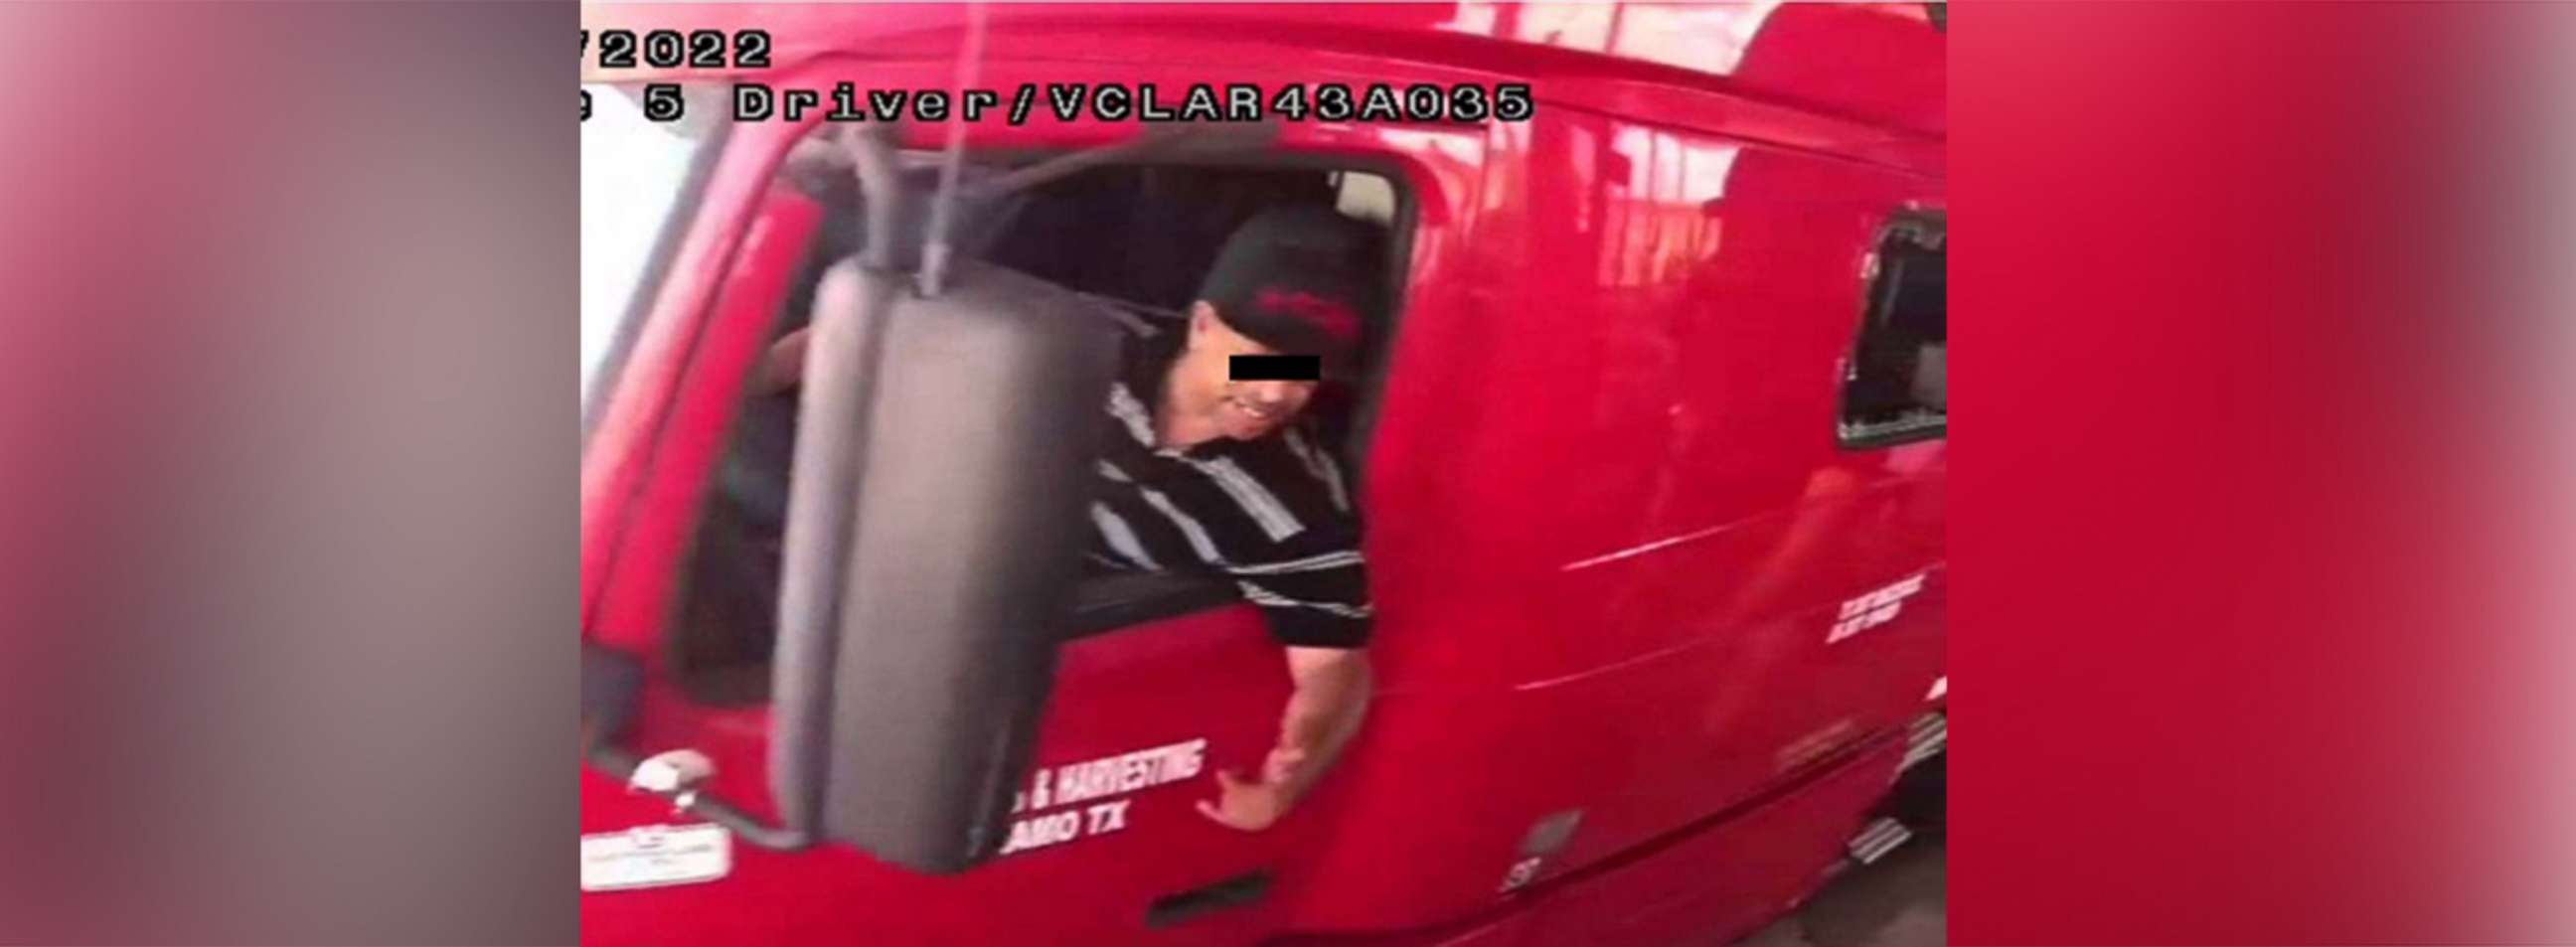 PHOTO:  The alleged driver of a truck carrying dozens of migrants, identified by Mexican immigration officials as "Homero N," is pictured in a handout image released by authorities in San Antonio, Texas, June 29, 2022.